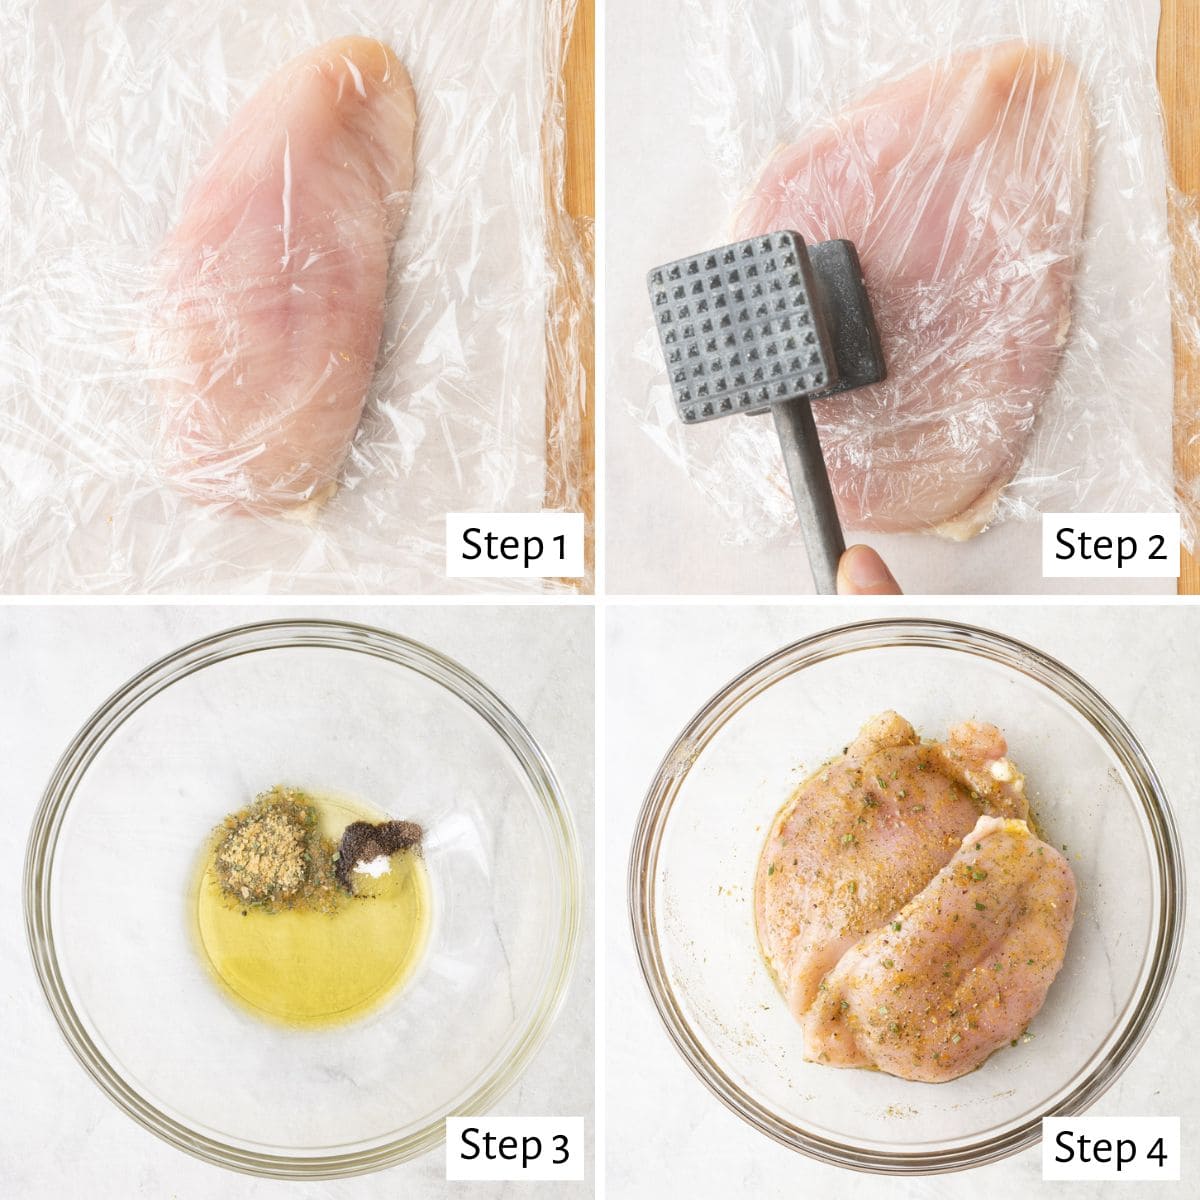 4-image collage of prepping the chicken: 1 - Chicken breast on a sheet of parchment paper covered with plastic wrap; 2 - Mallet pounding the chicken breast; 3 - Oil, ranch, salt, and pepper in a bowl before mixing; 4 - After adding the chicken breast and mixing to fully coat in seasoning.